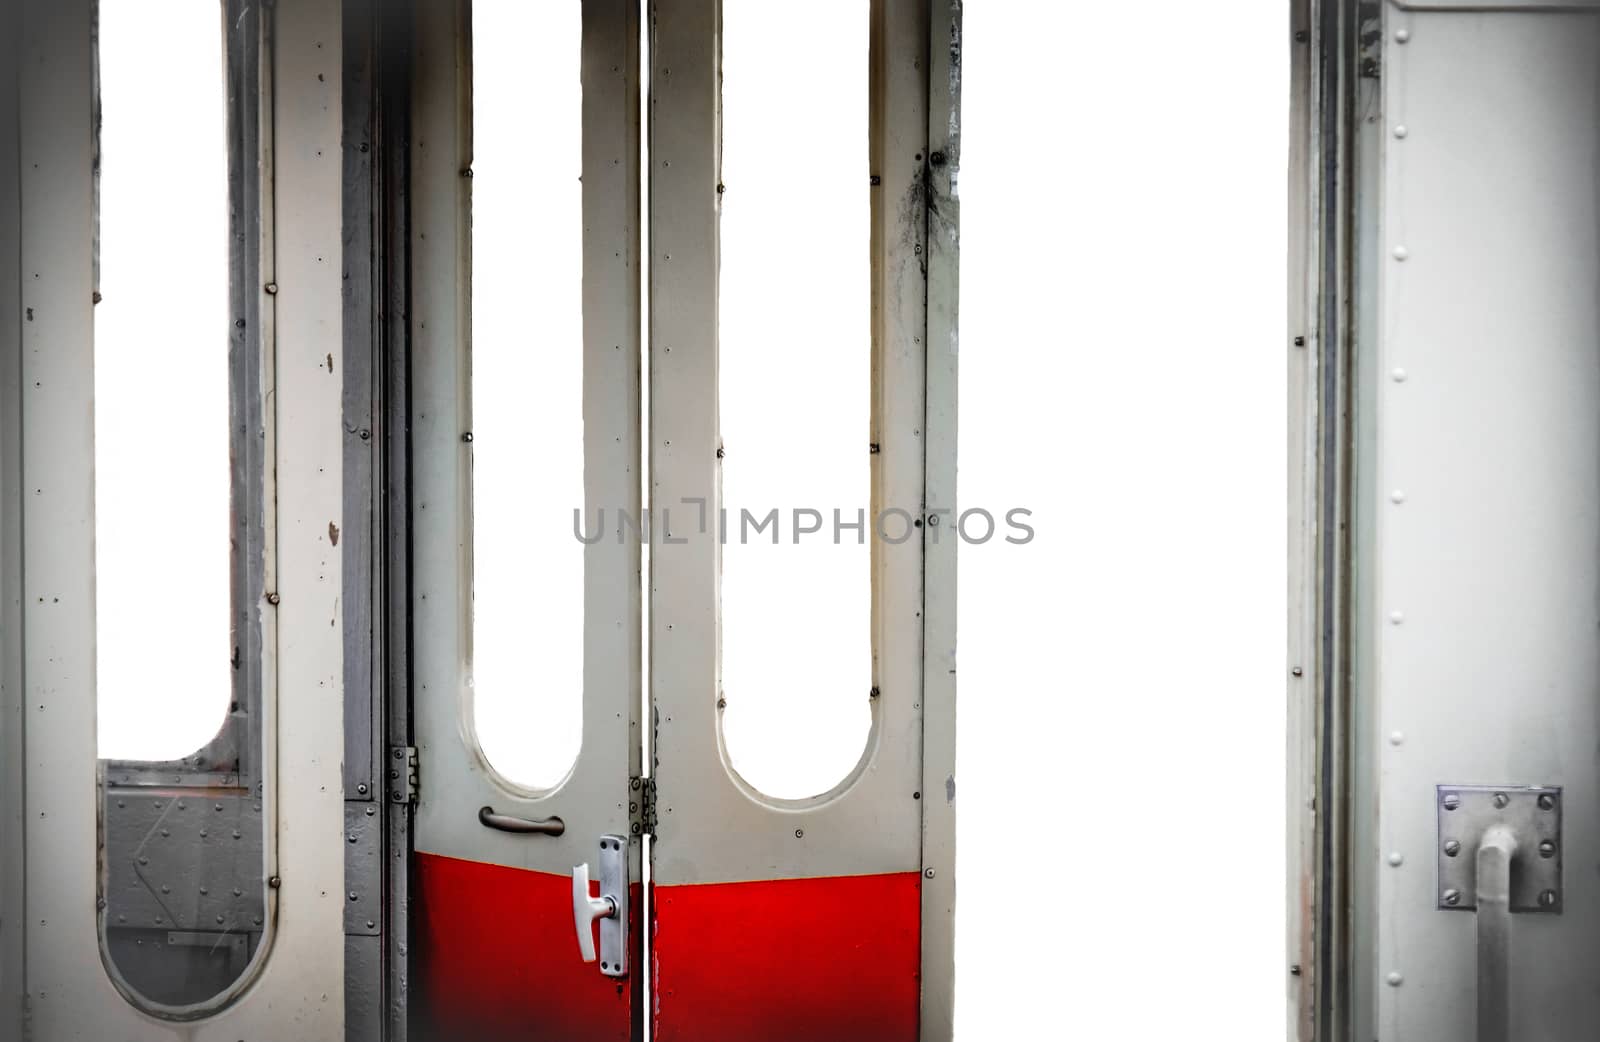 old tram open doors interior isolated white background - visit city with public transport concept by LucaLorenzelli